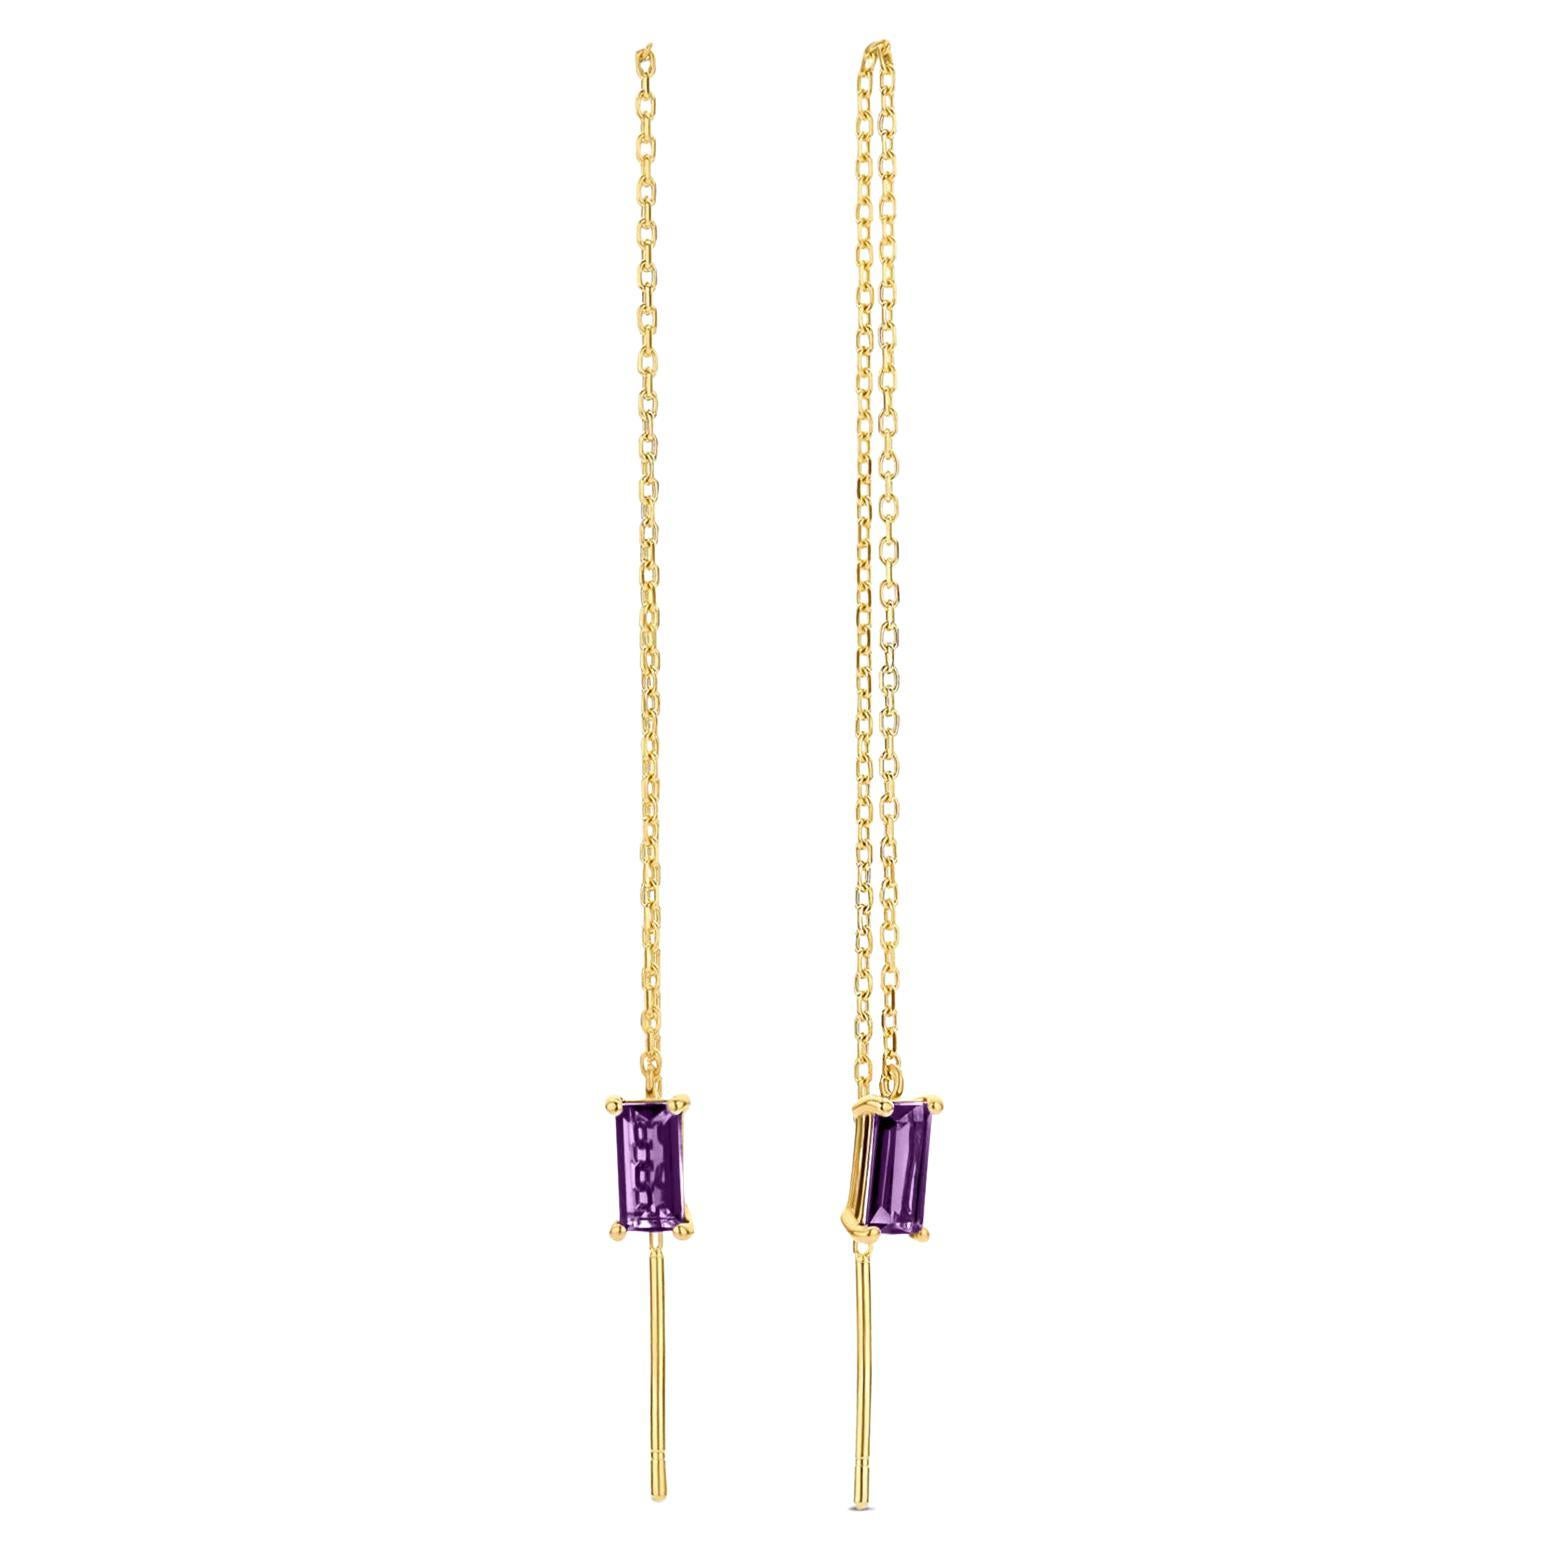 14k Solid Gold Drop Earrings with amethysts.  Chain Gold Earrings For Sale